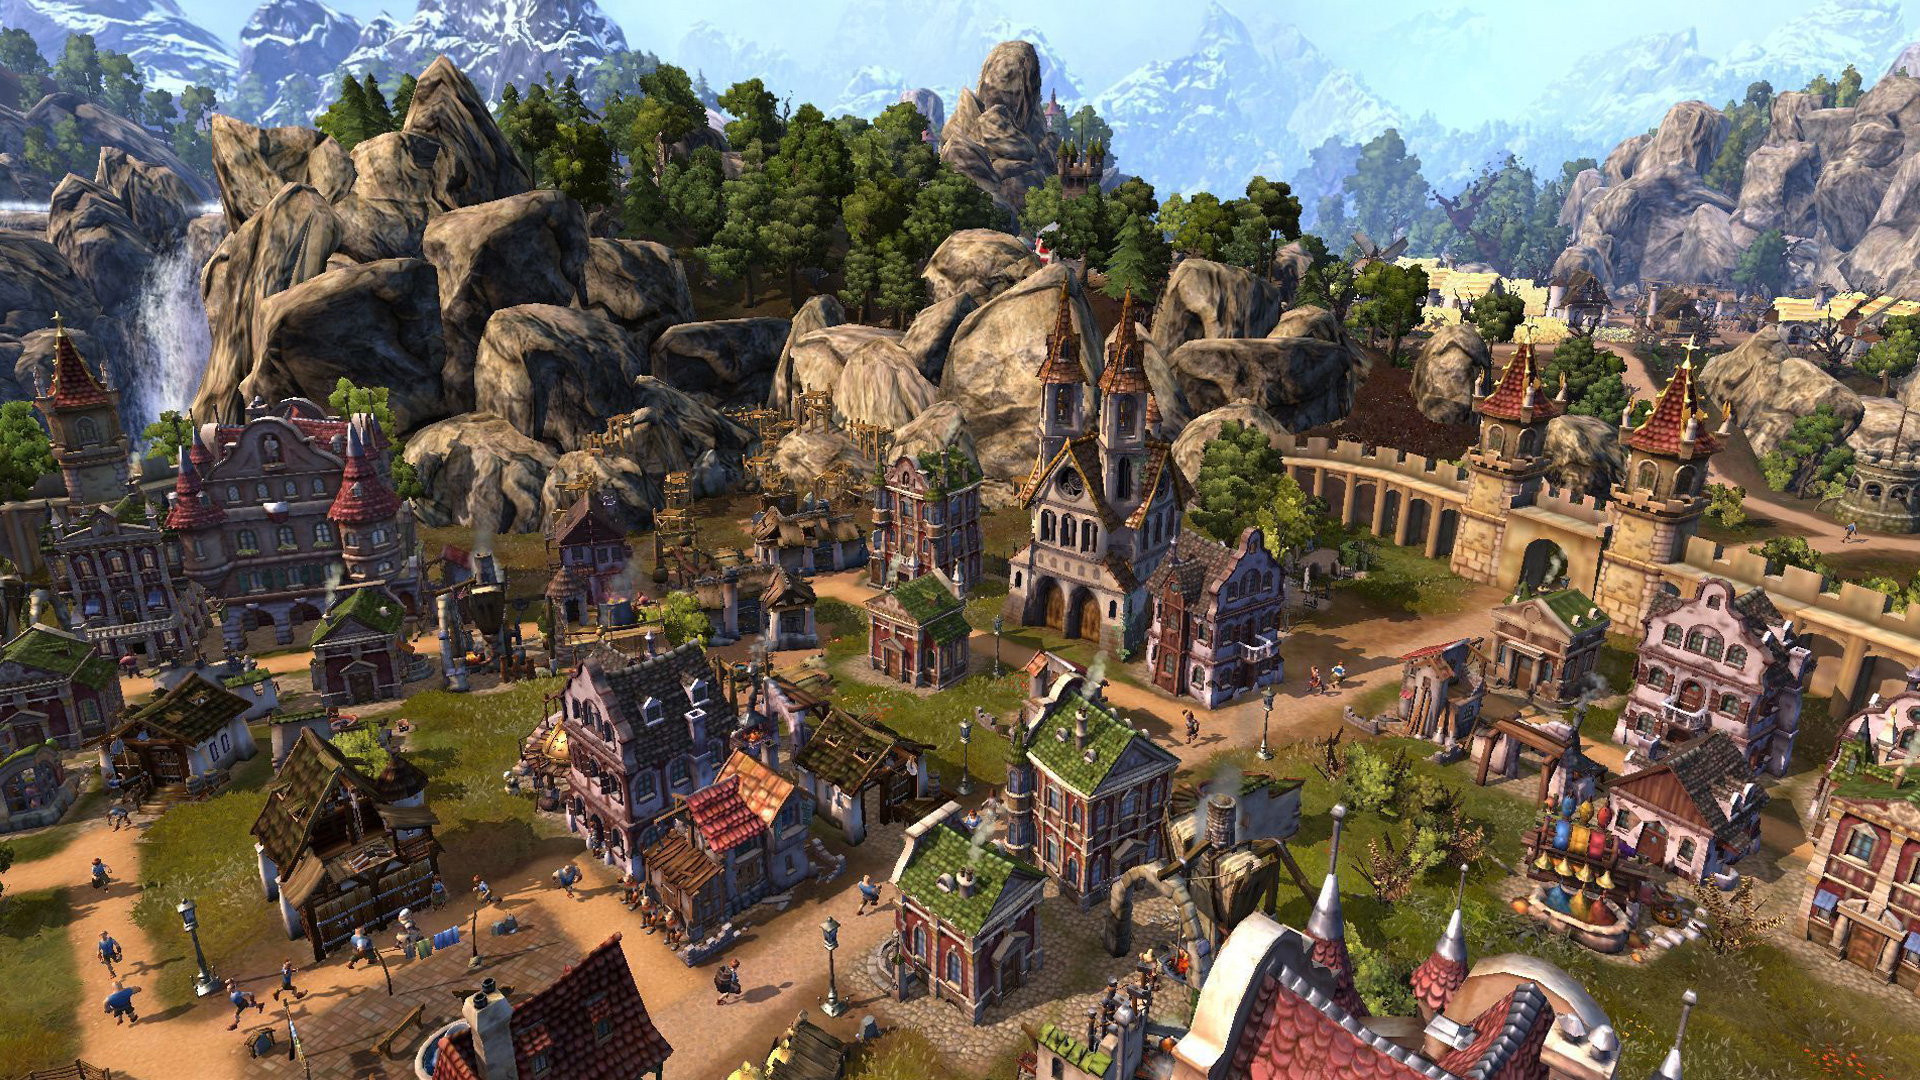 the settlers 7 paths to a kingdom download